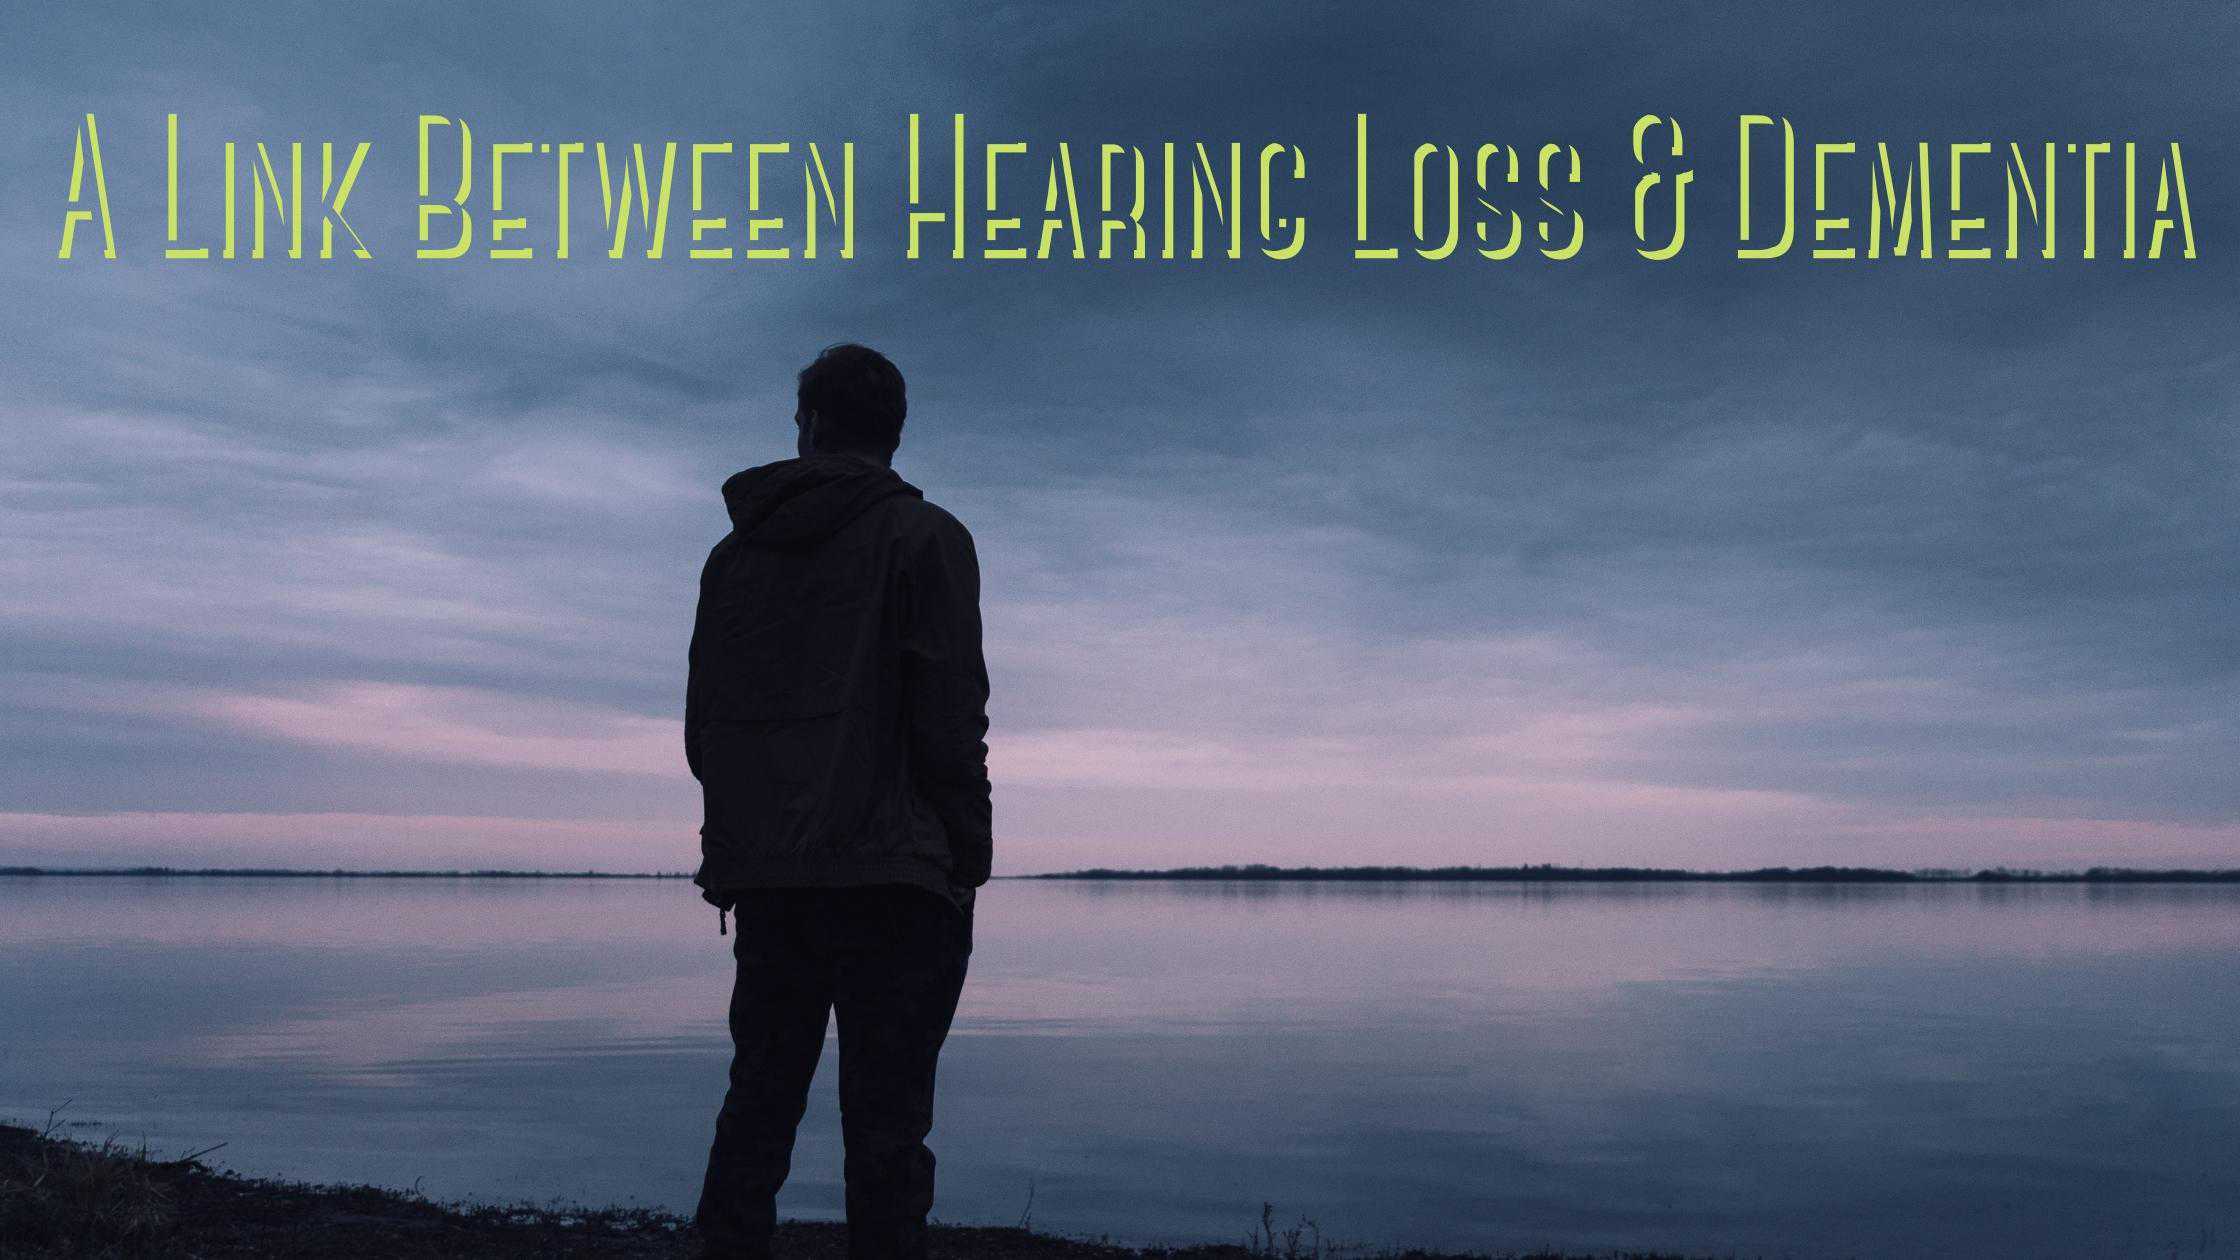 Featured image for “A Link Between Hearing Loss & Dementia”